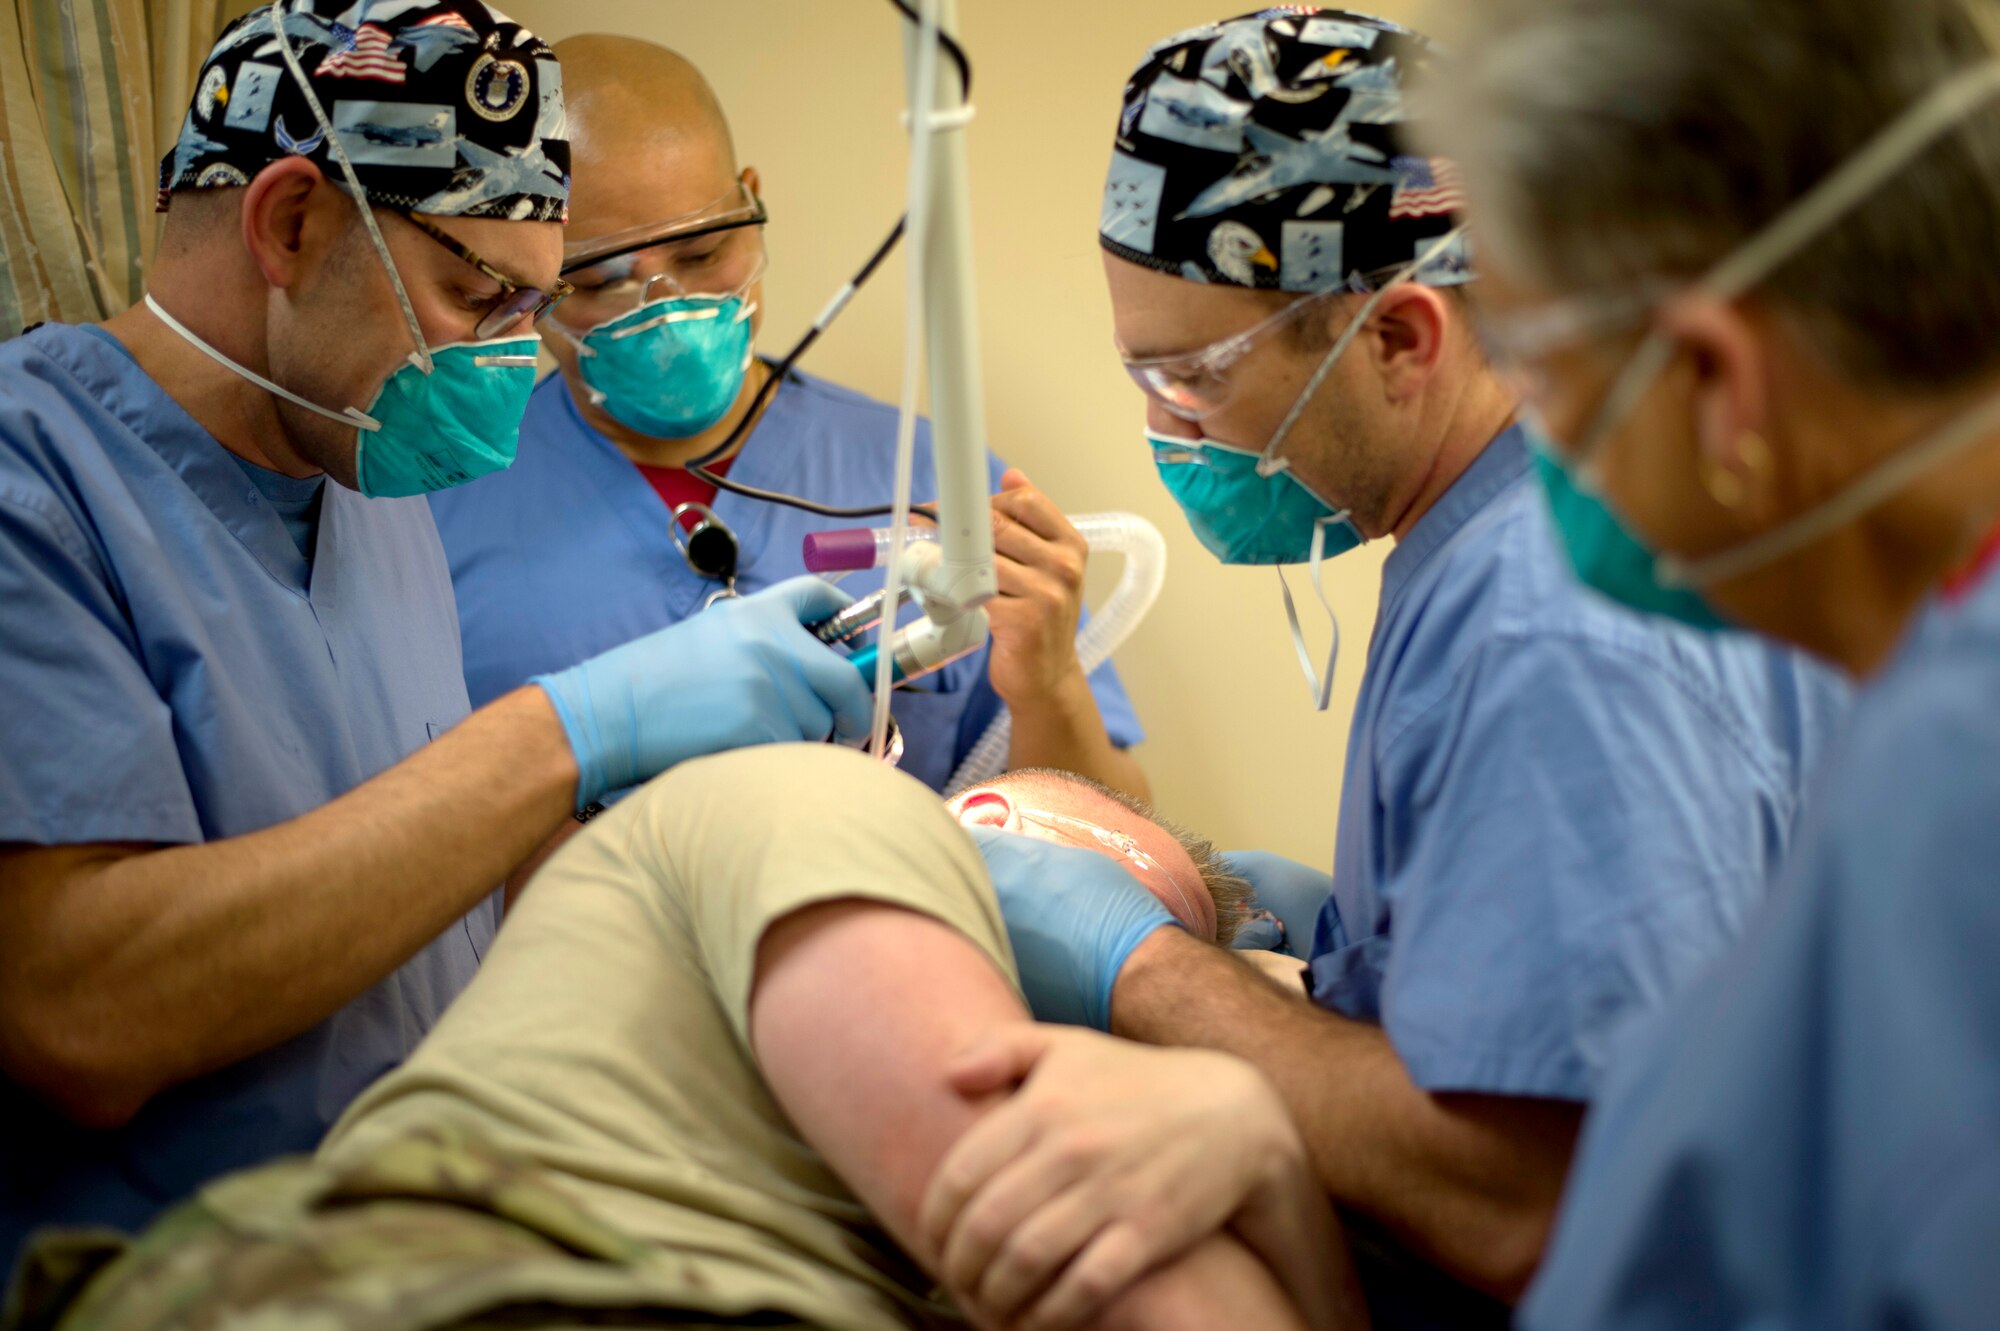 An Active duty dermatology patient receives laser treatment for scarring on his neck at MacDill Air Force Base, Fla., March 9, 2018.